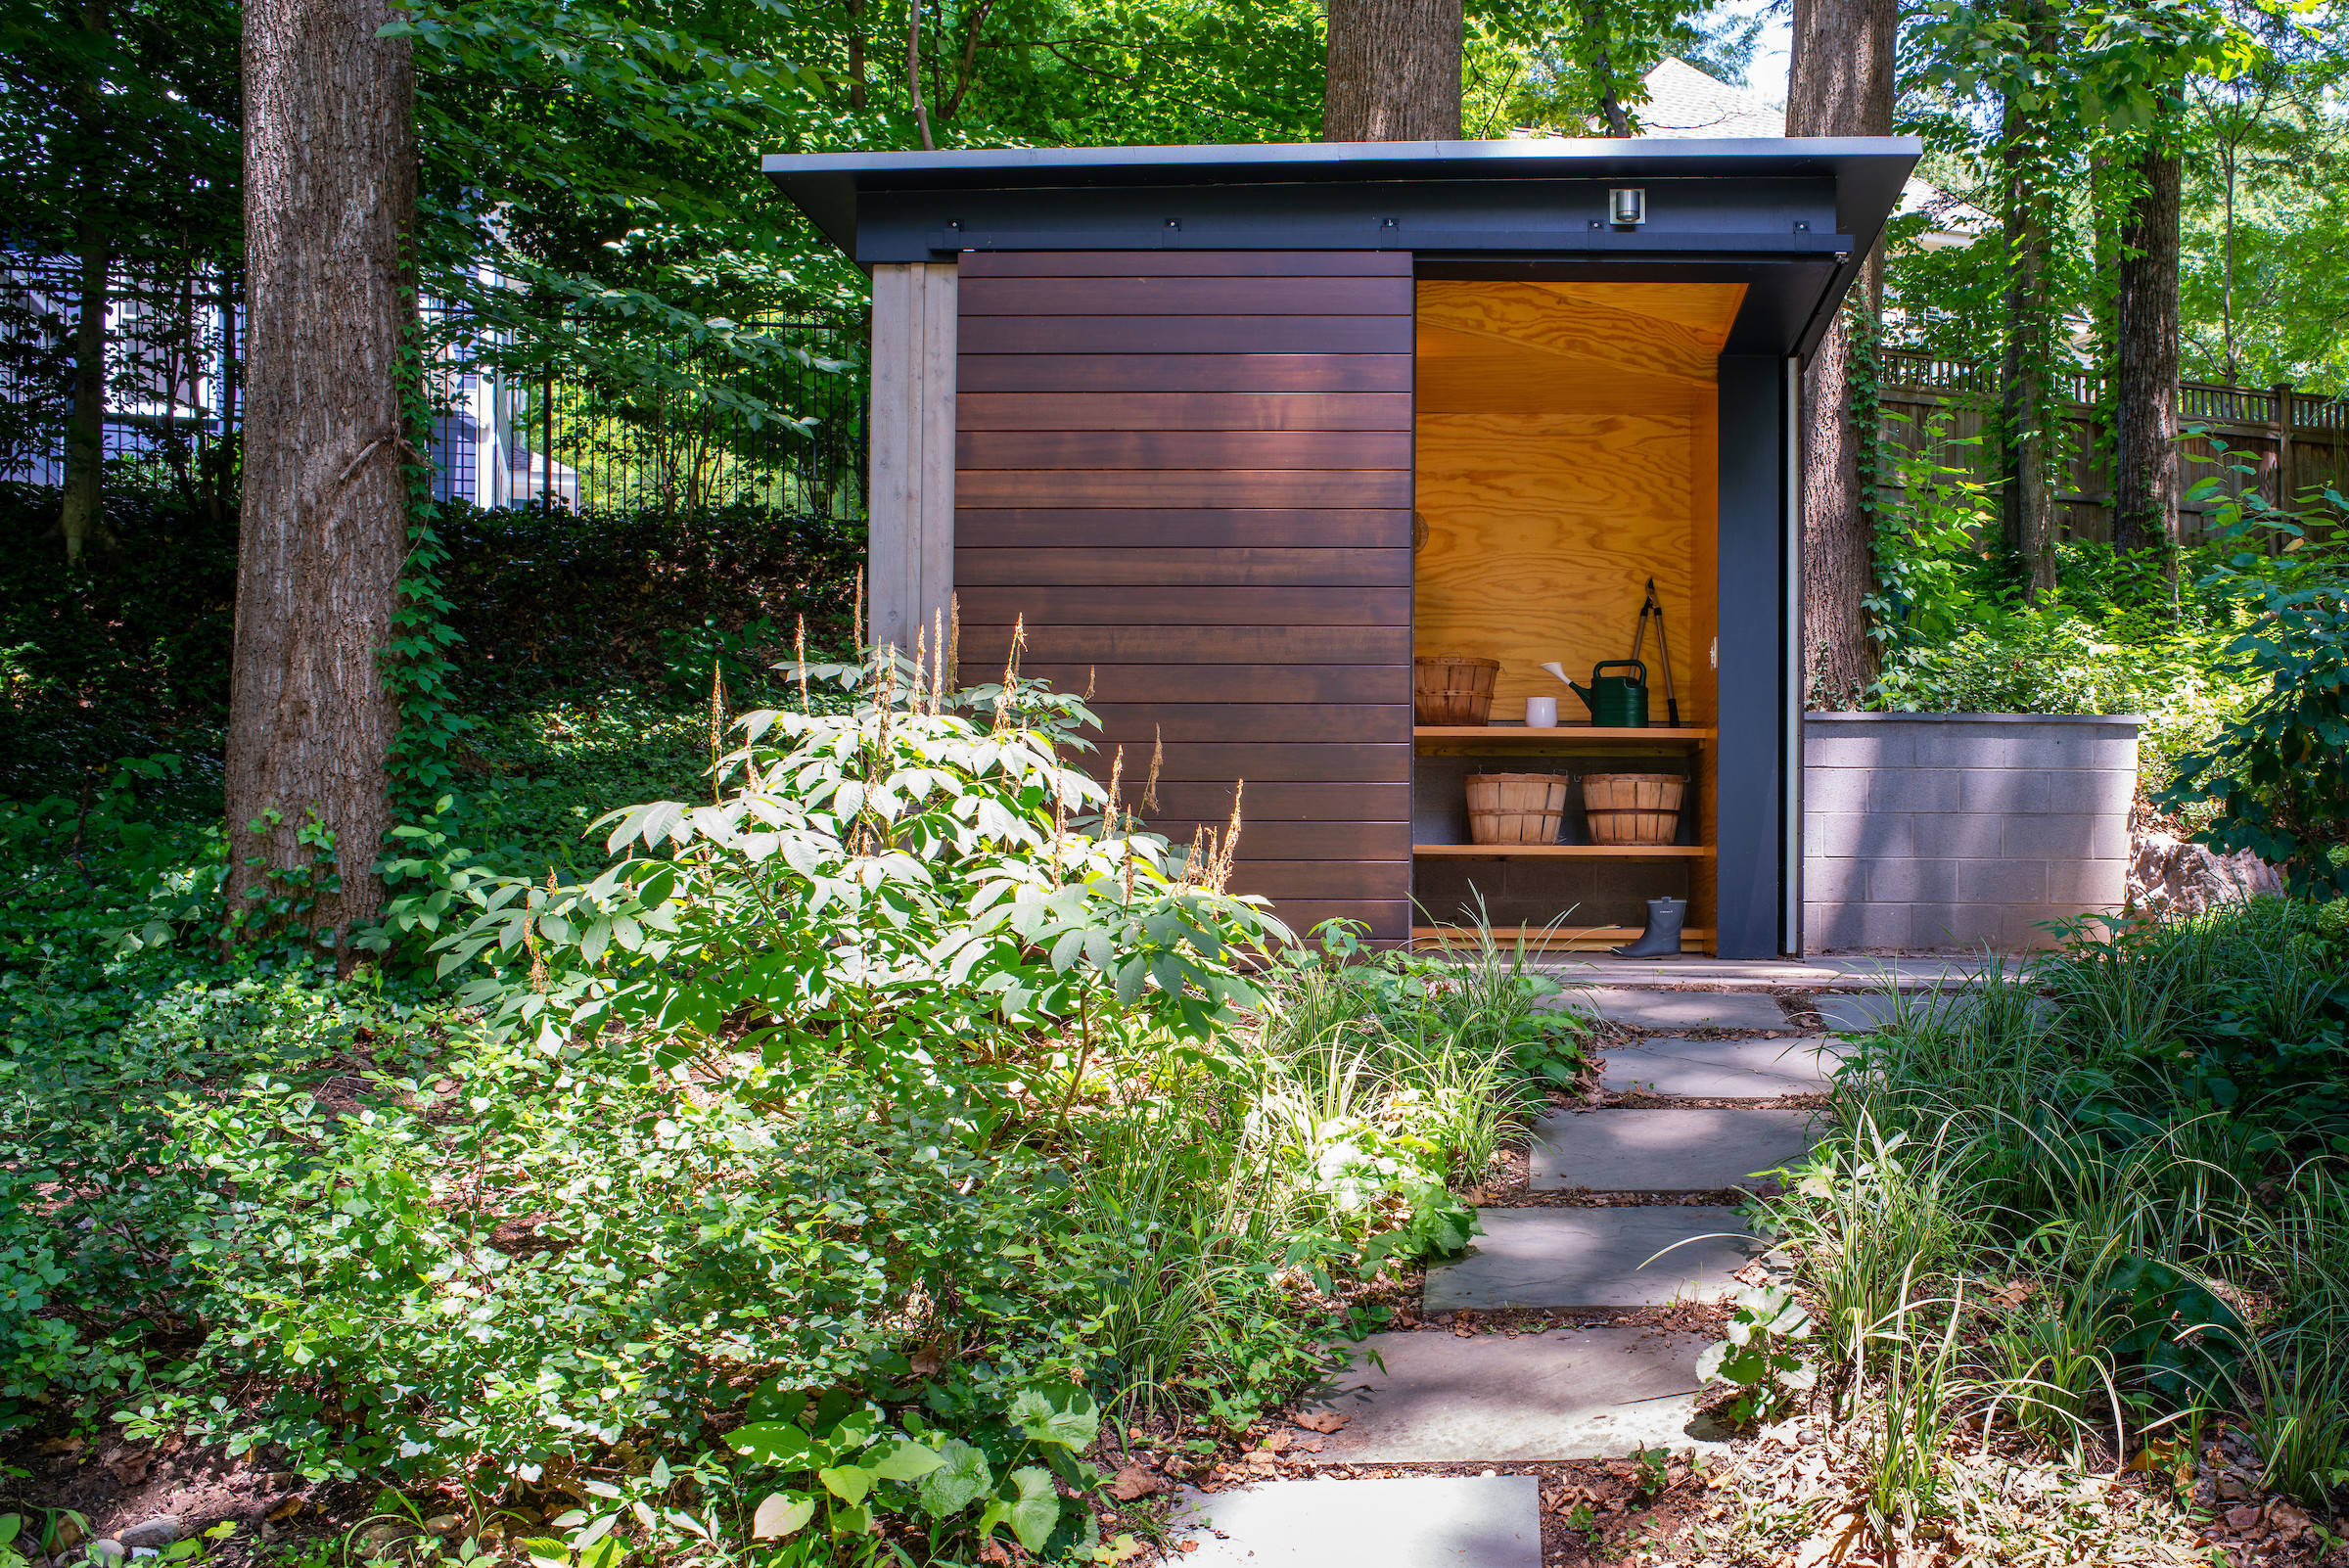 75 Shed Ideas You'll Love - August, 2023 | Houzz